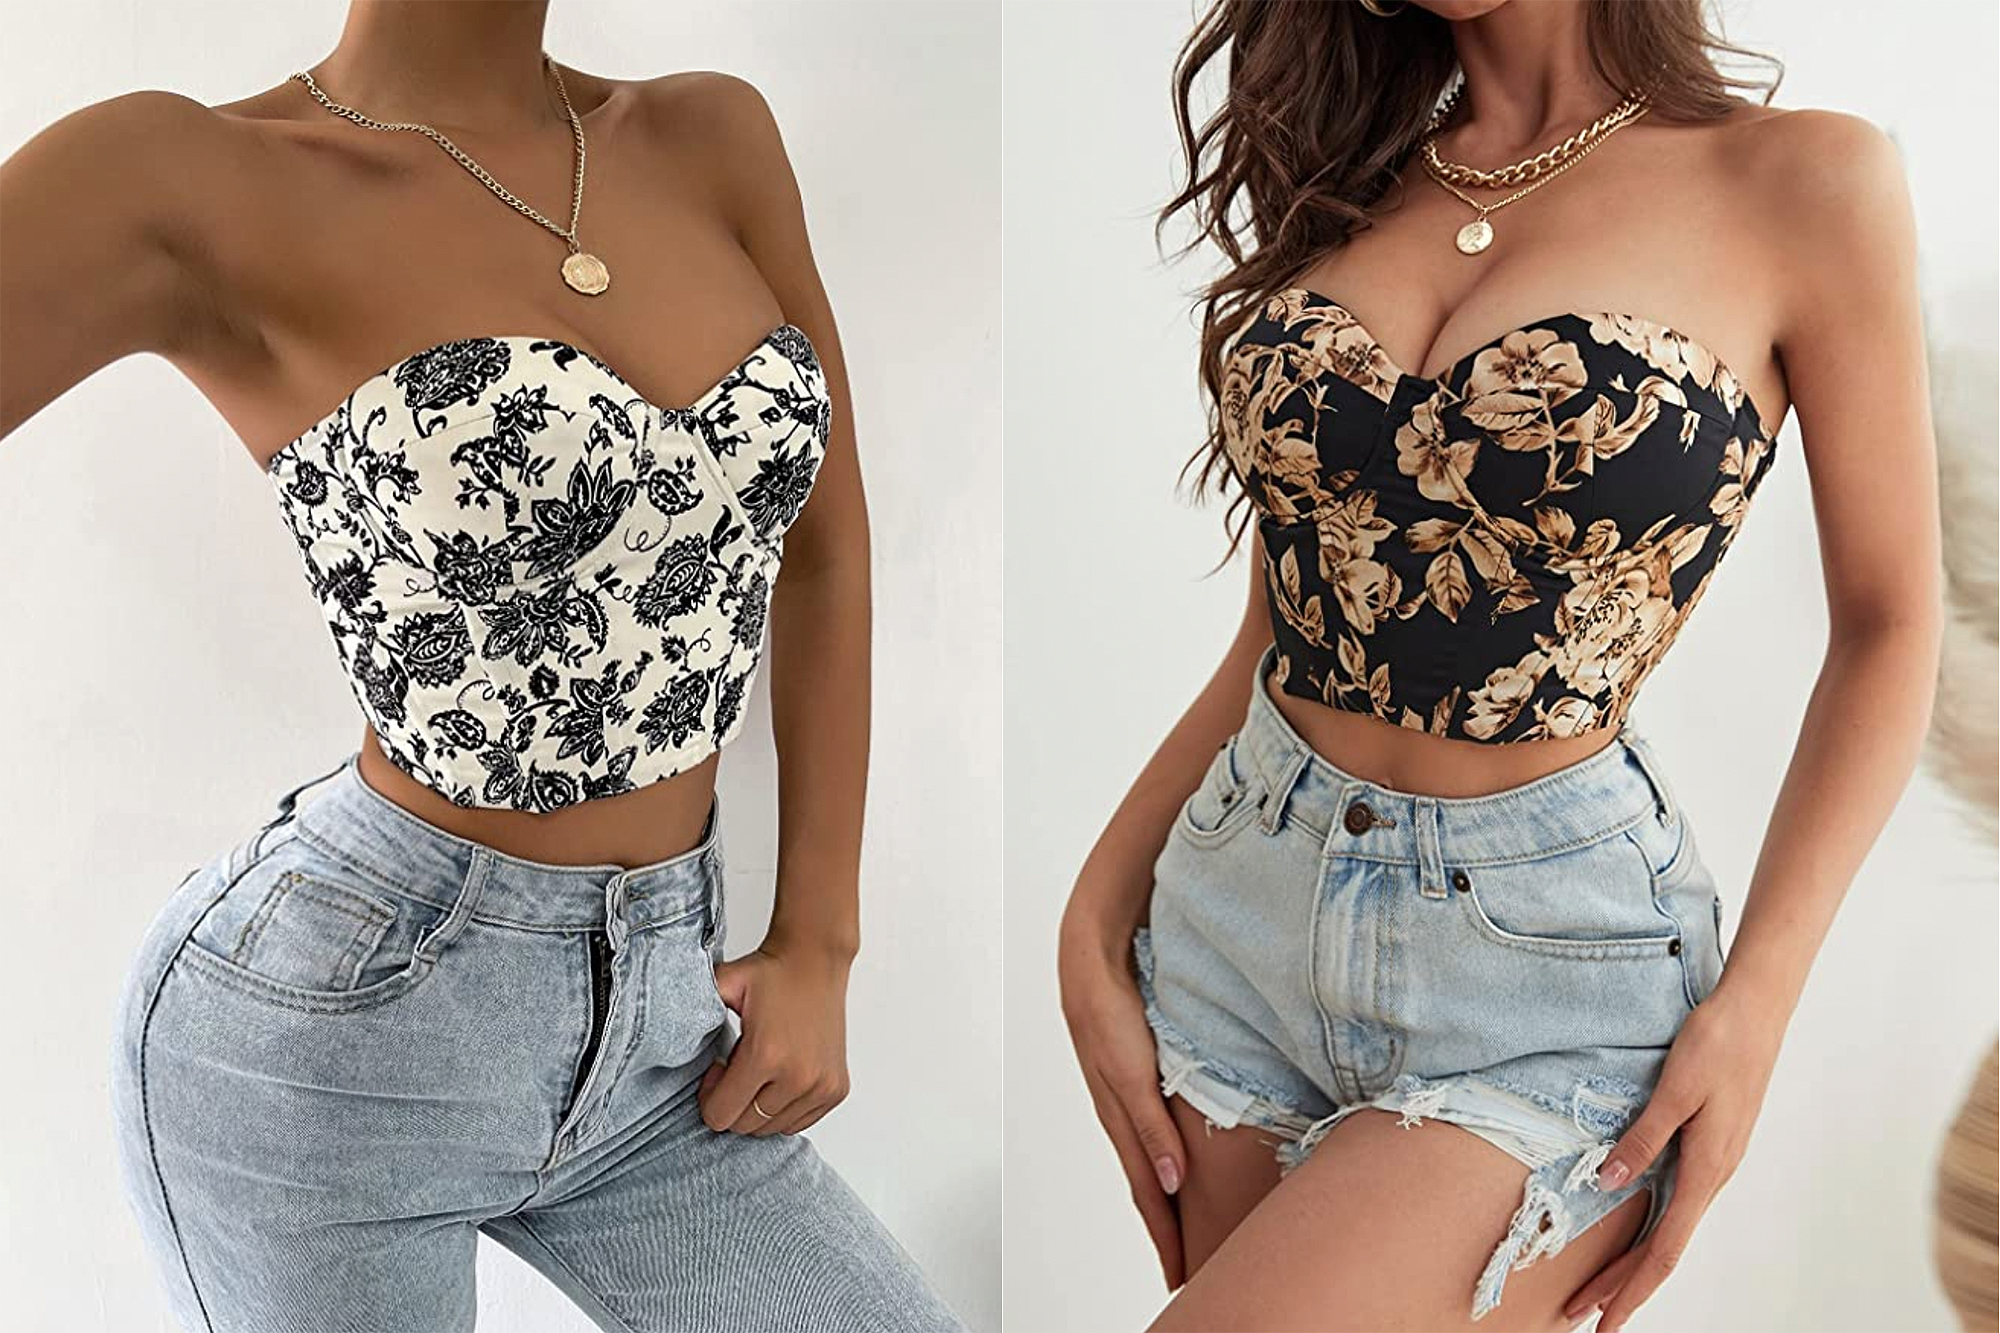 SOLY HUX Bustier Top Will Give You a Perfect Cinched-In Look